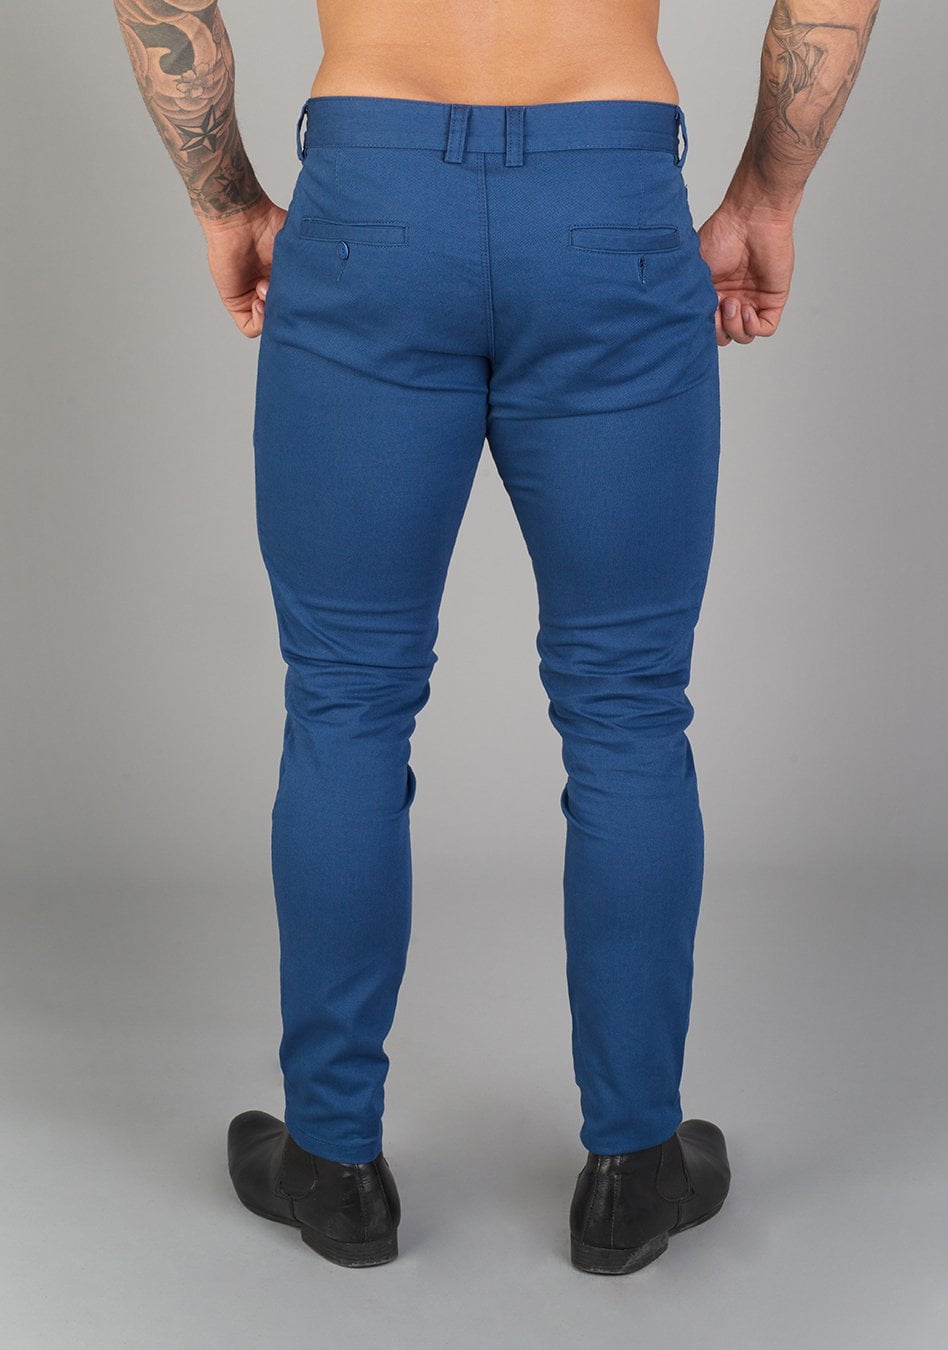 Peacock  Athletic Fit Chinos - 73.70 - Oxcloth -  muscle-fit for bodybuilders and athletes